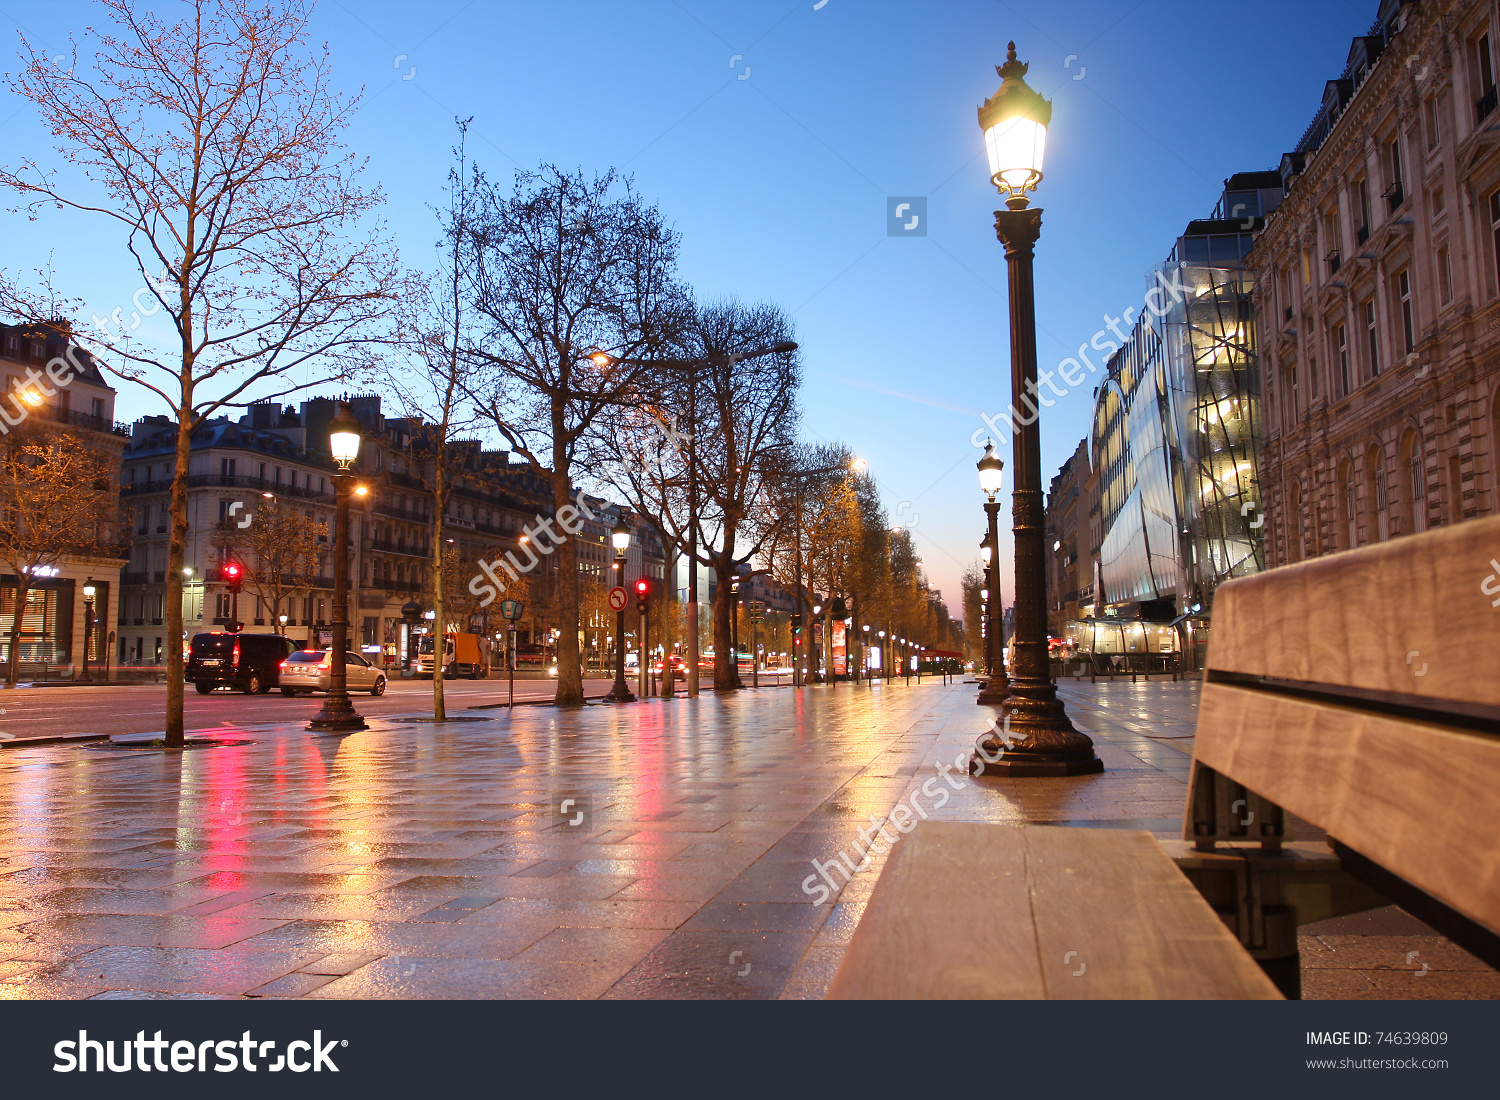 Champ elysees road clipart.